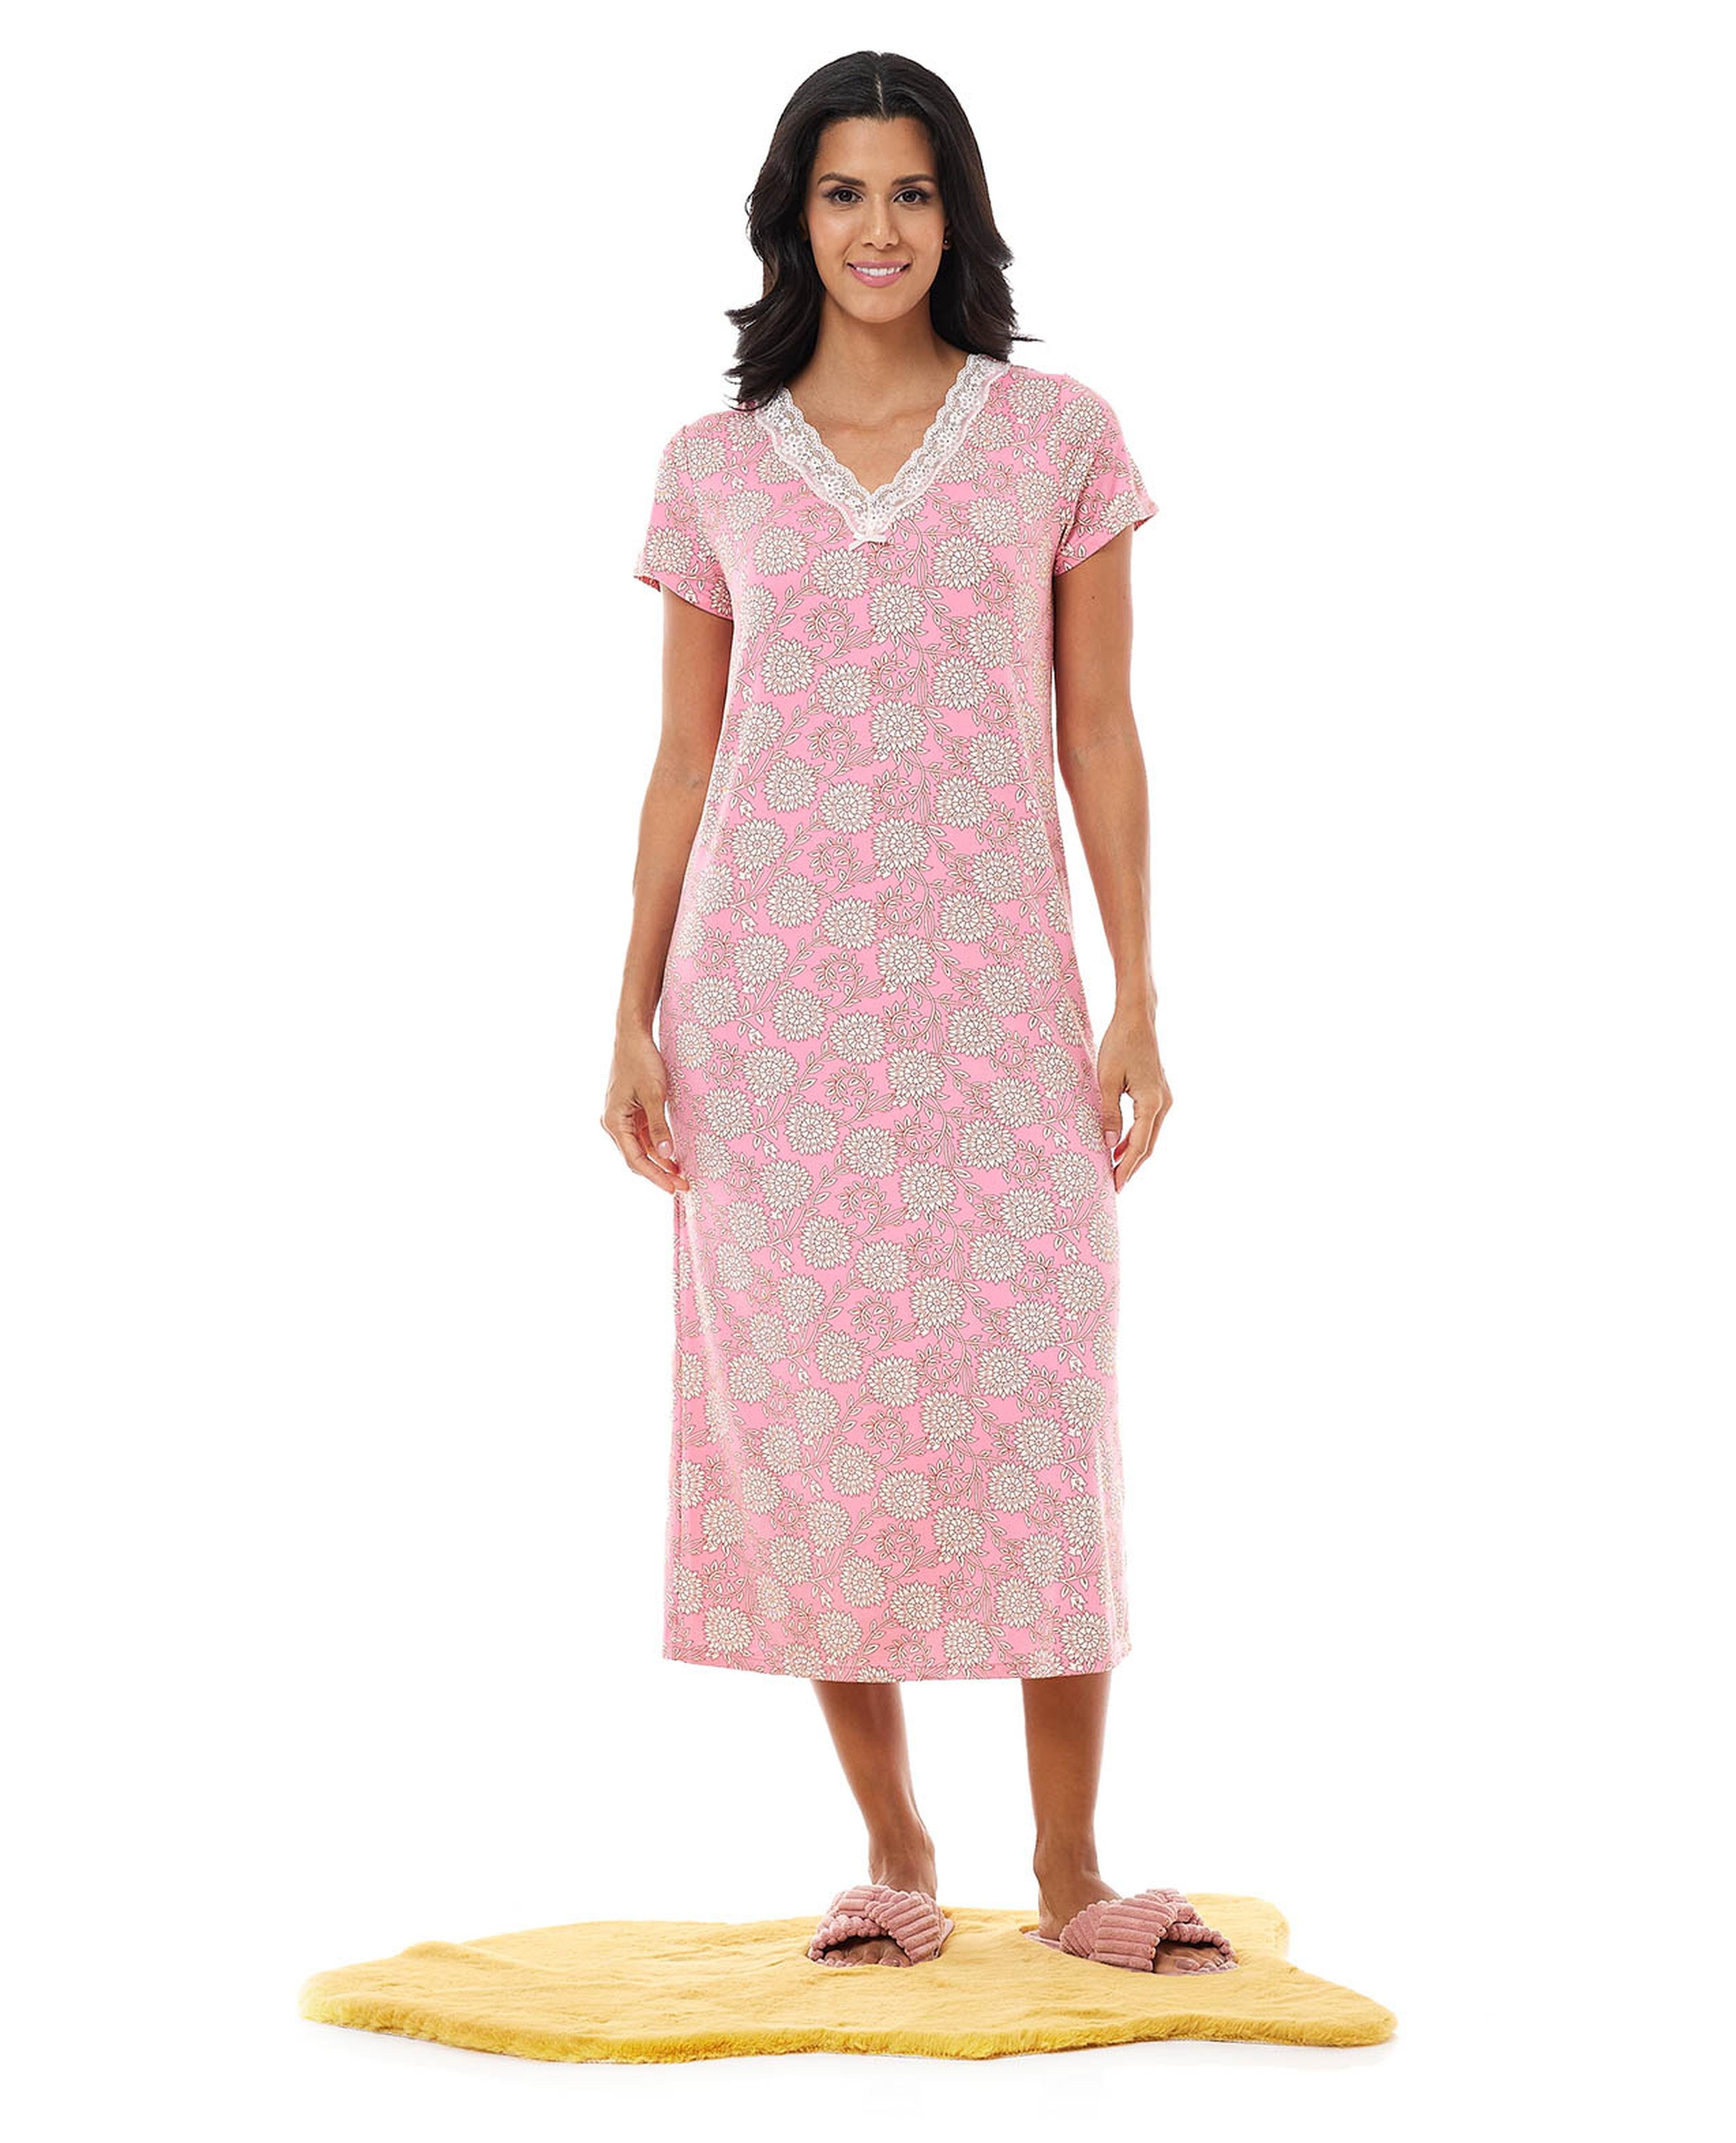 Floral Print Nightgown